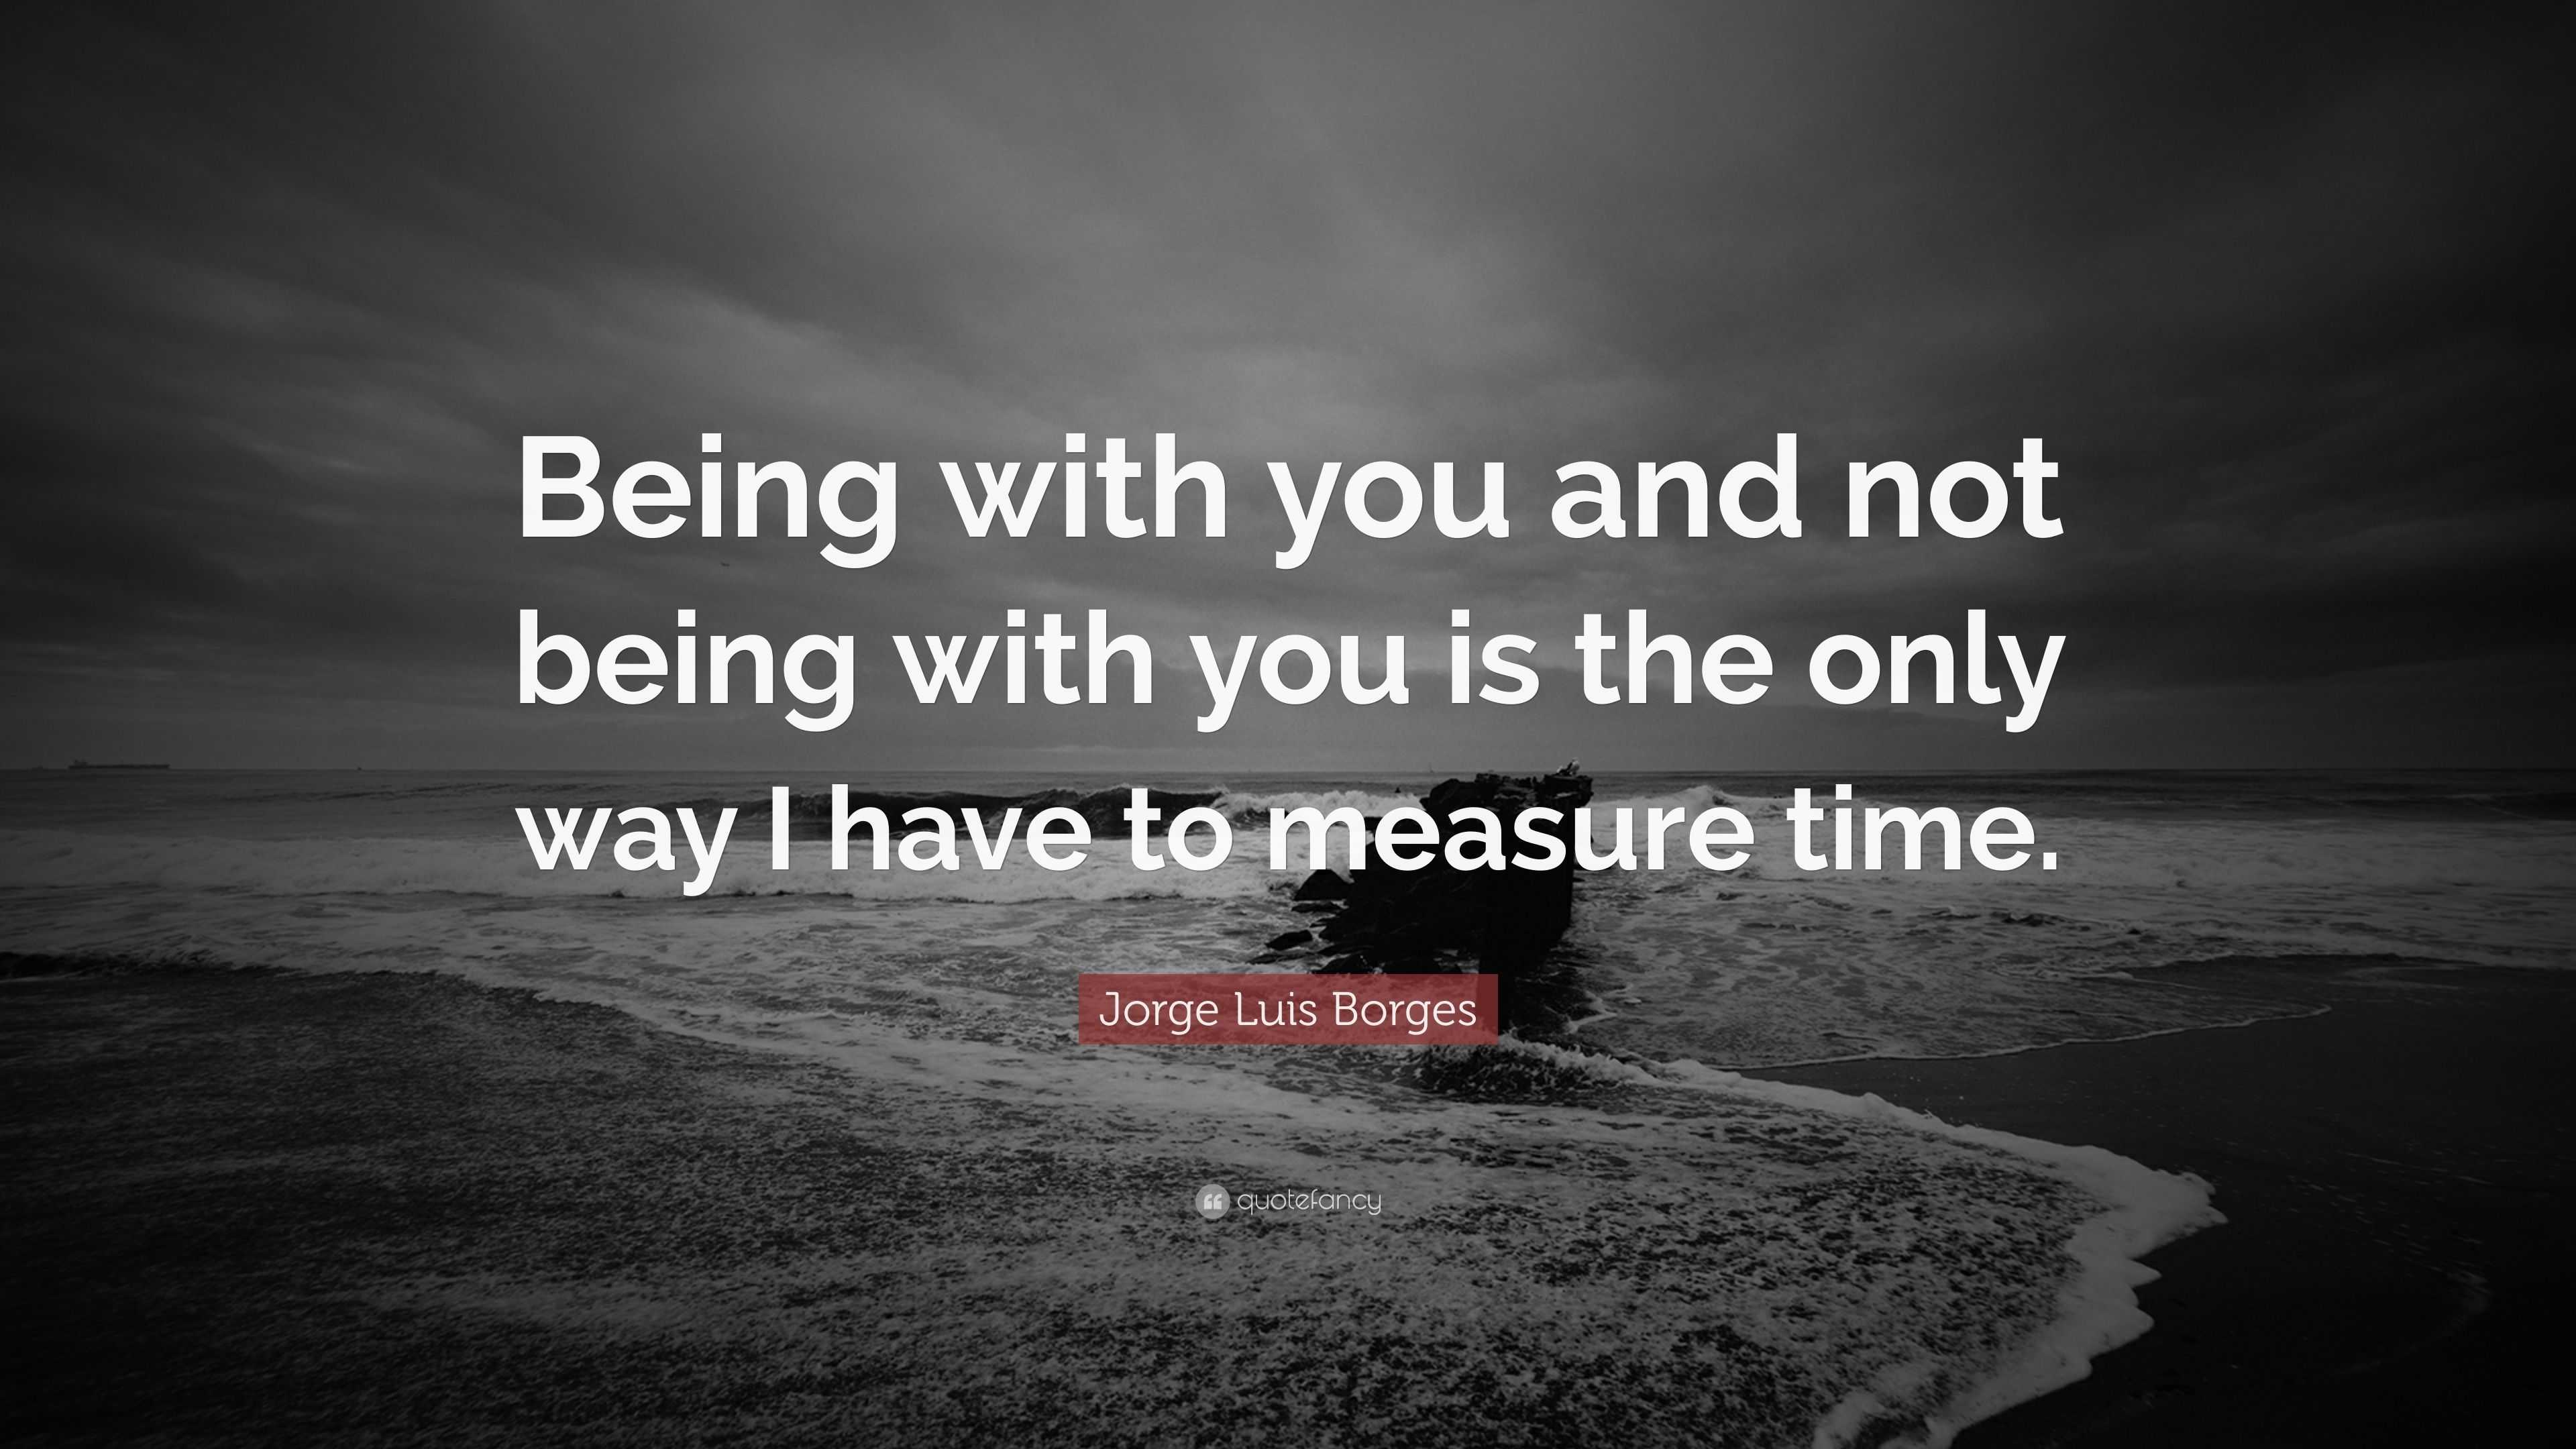 Jorge Luis Borges Quote: “Being with you and not being with you is the ...